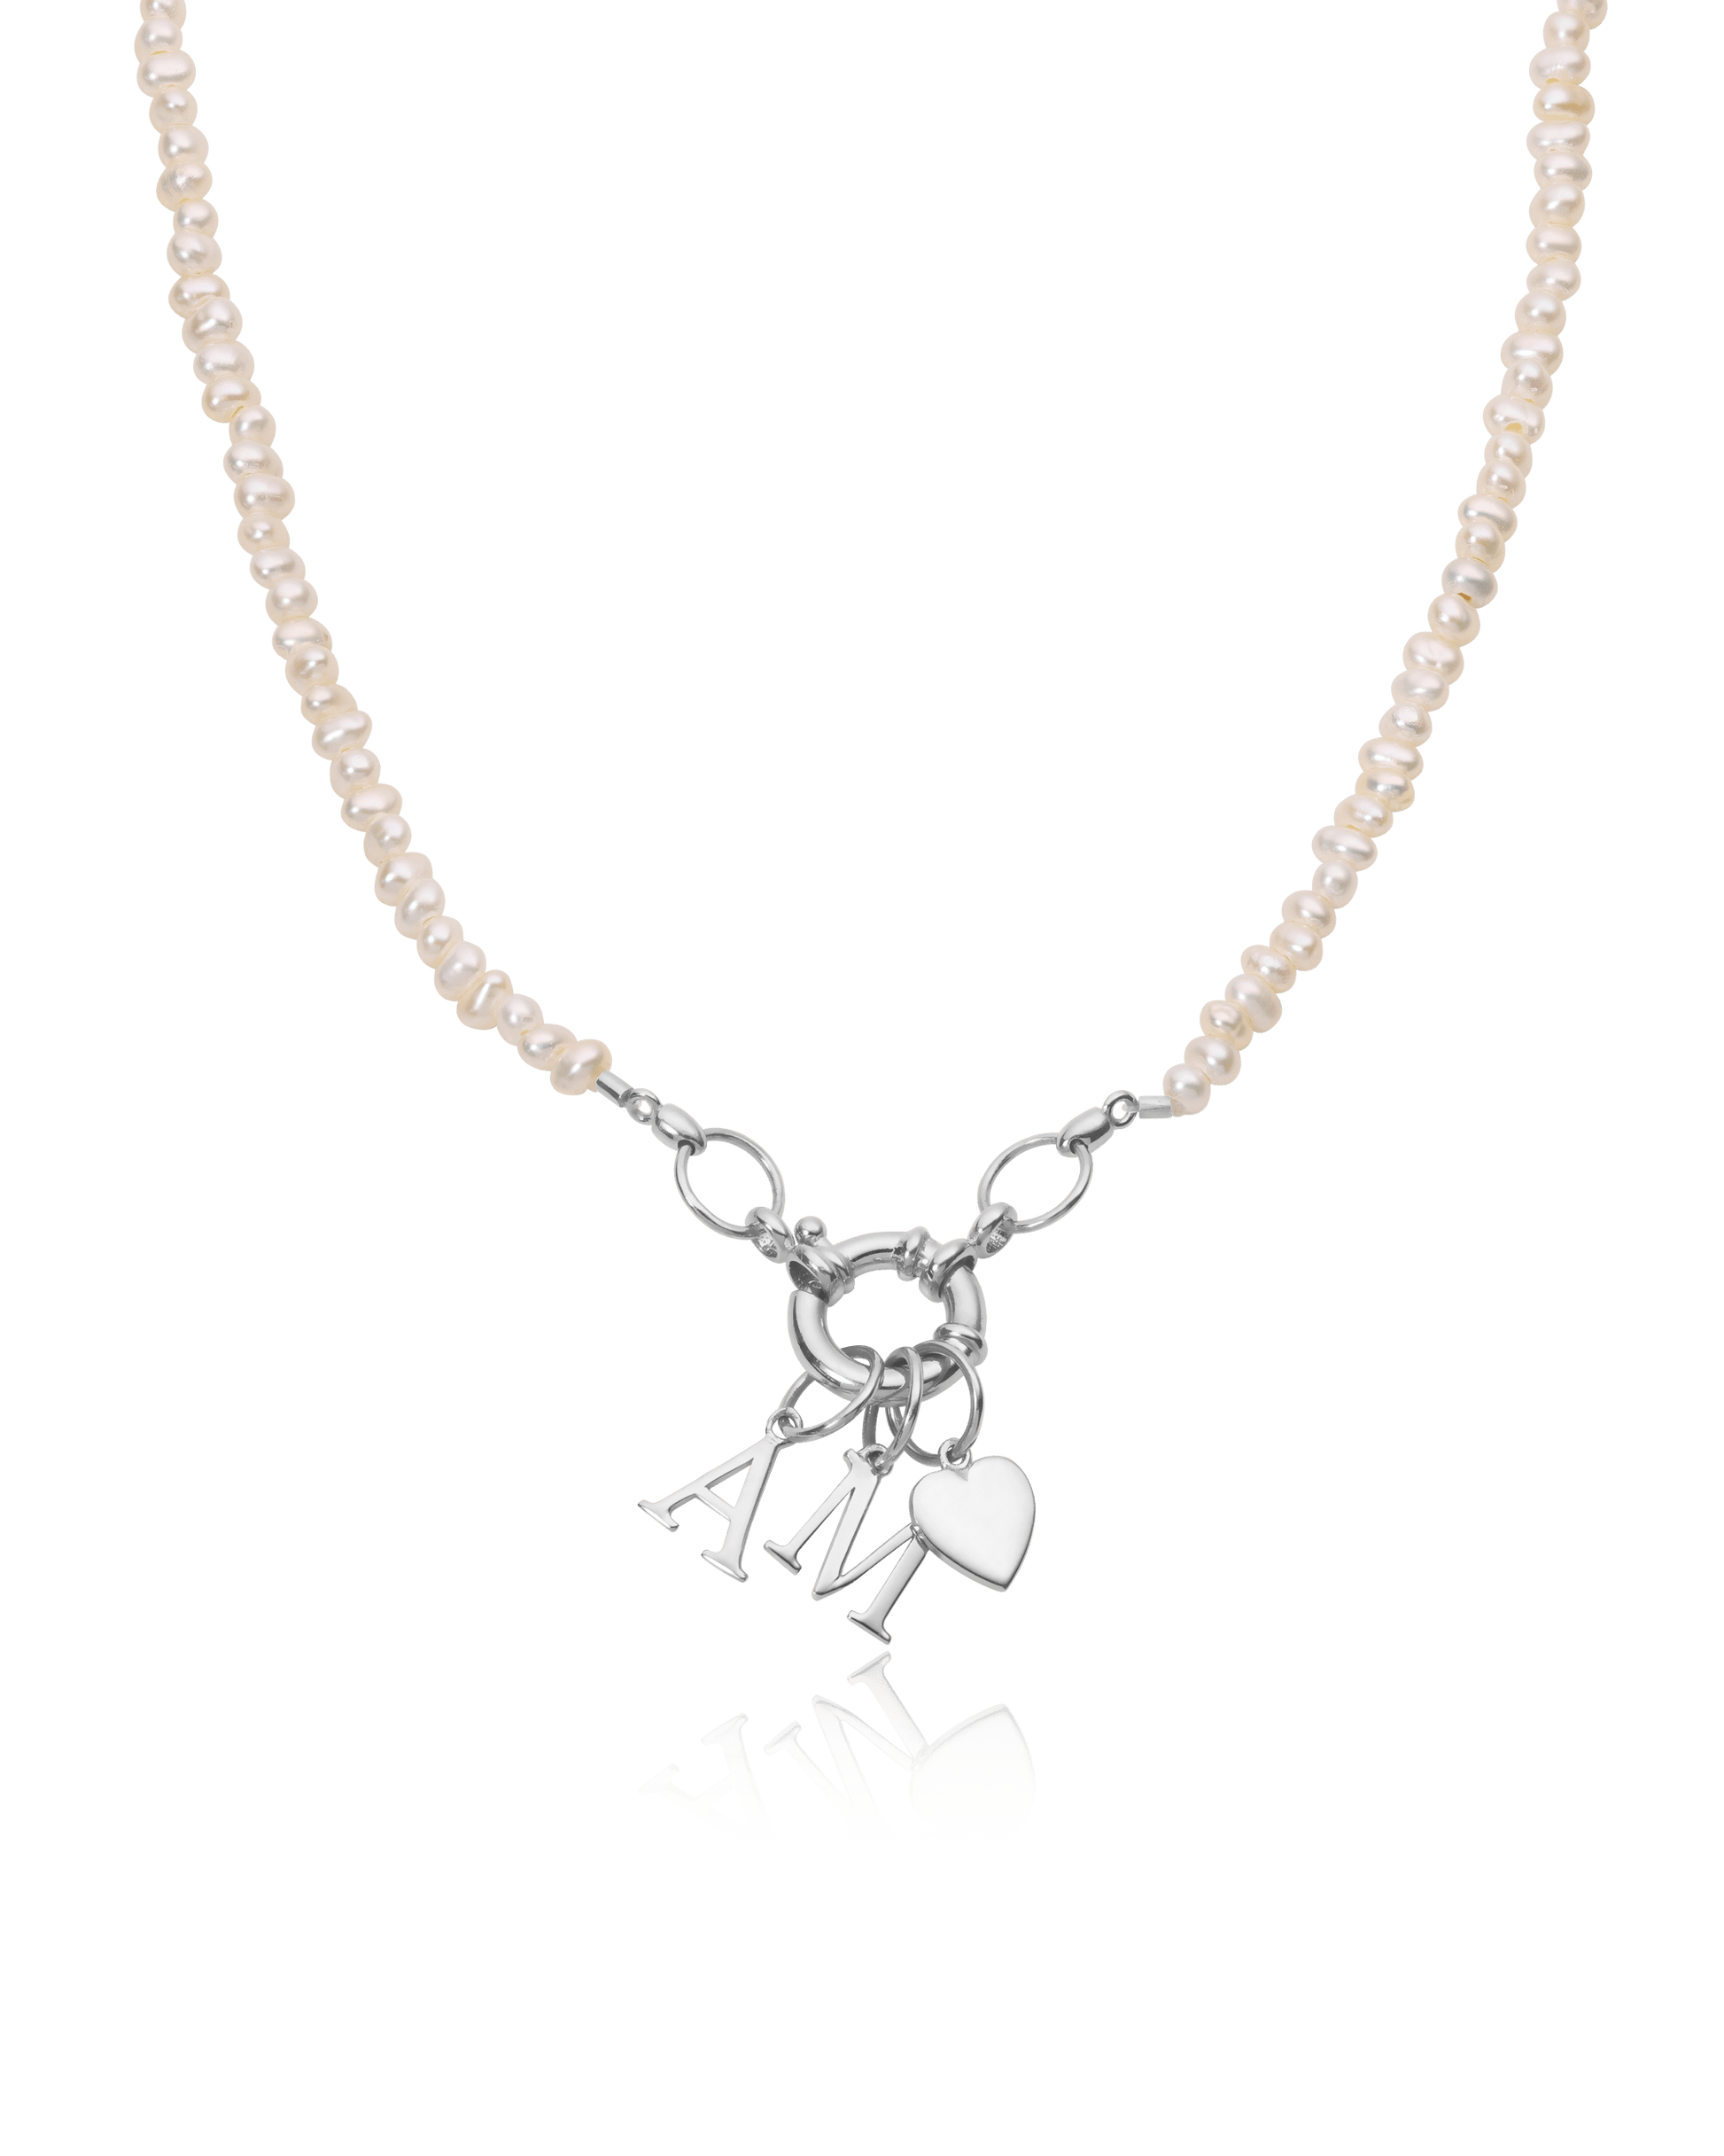 Green Jade Charm Lock Necklace - 925 Sterling Silver Necklaces magal-dev Pearl (OUT OF STOCK) 1 Charm 16"